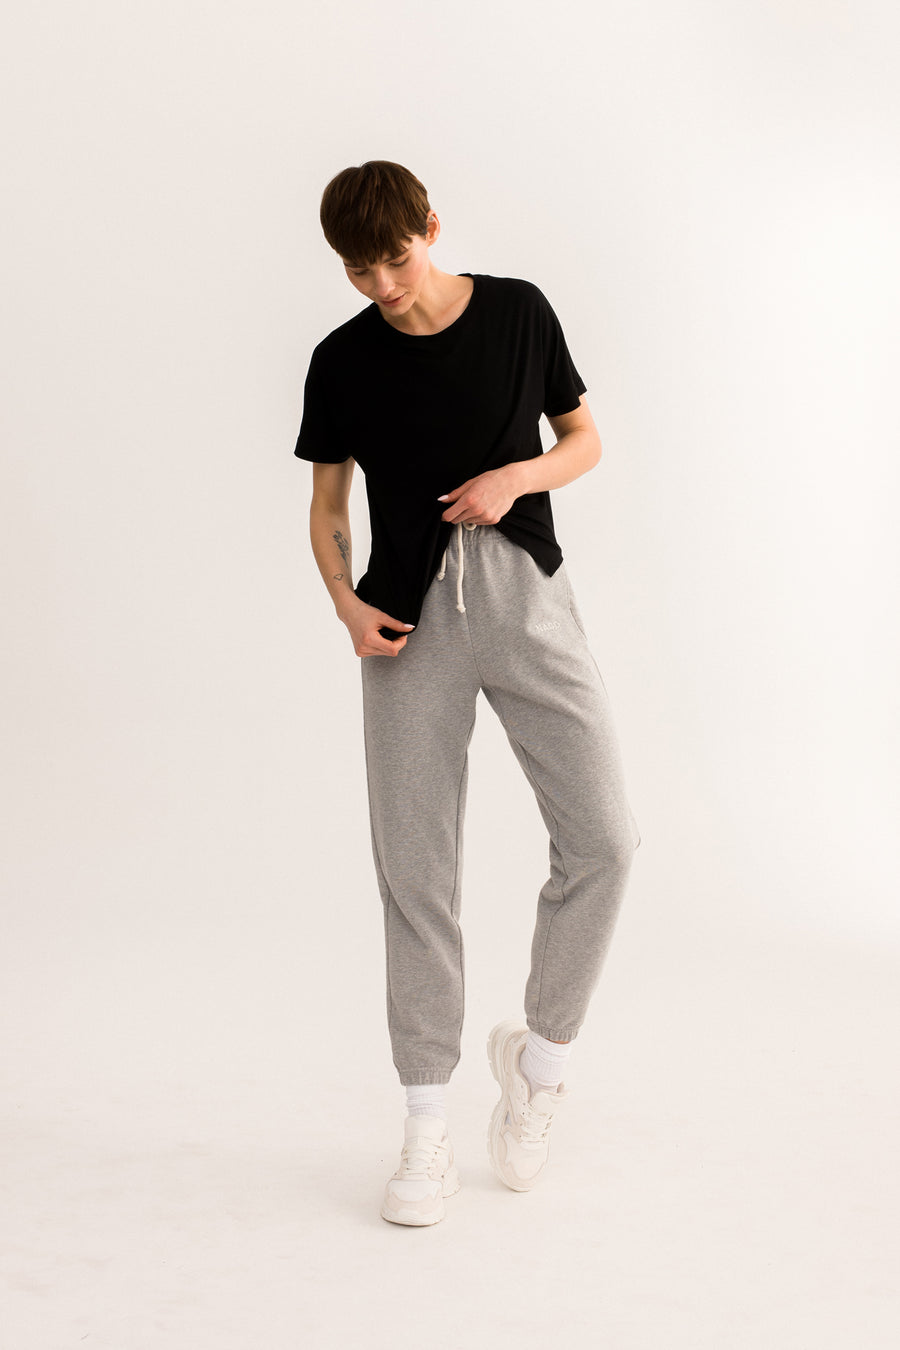 Sweatpants in organic cotton / 04 / 03 / mist grey *t-shirt-in-organic-cotton-13-02-onyx-black* ?The model is 178cm tall and wears size S? |